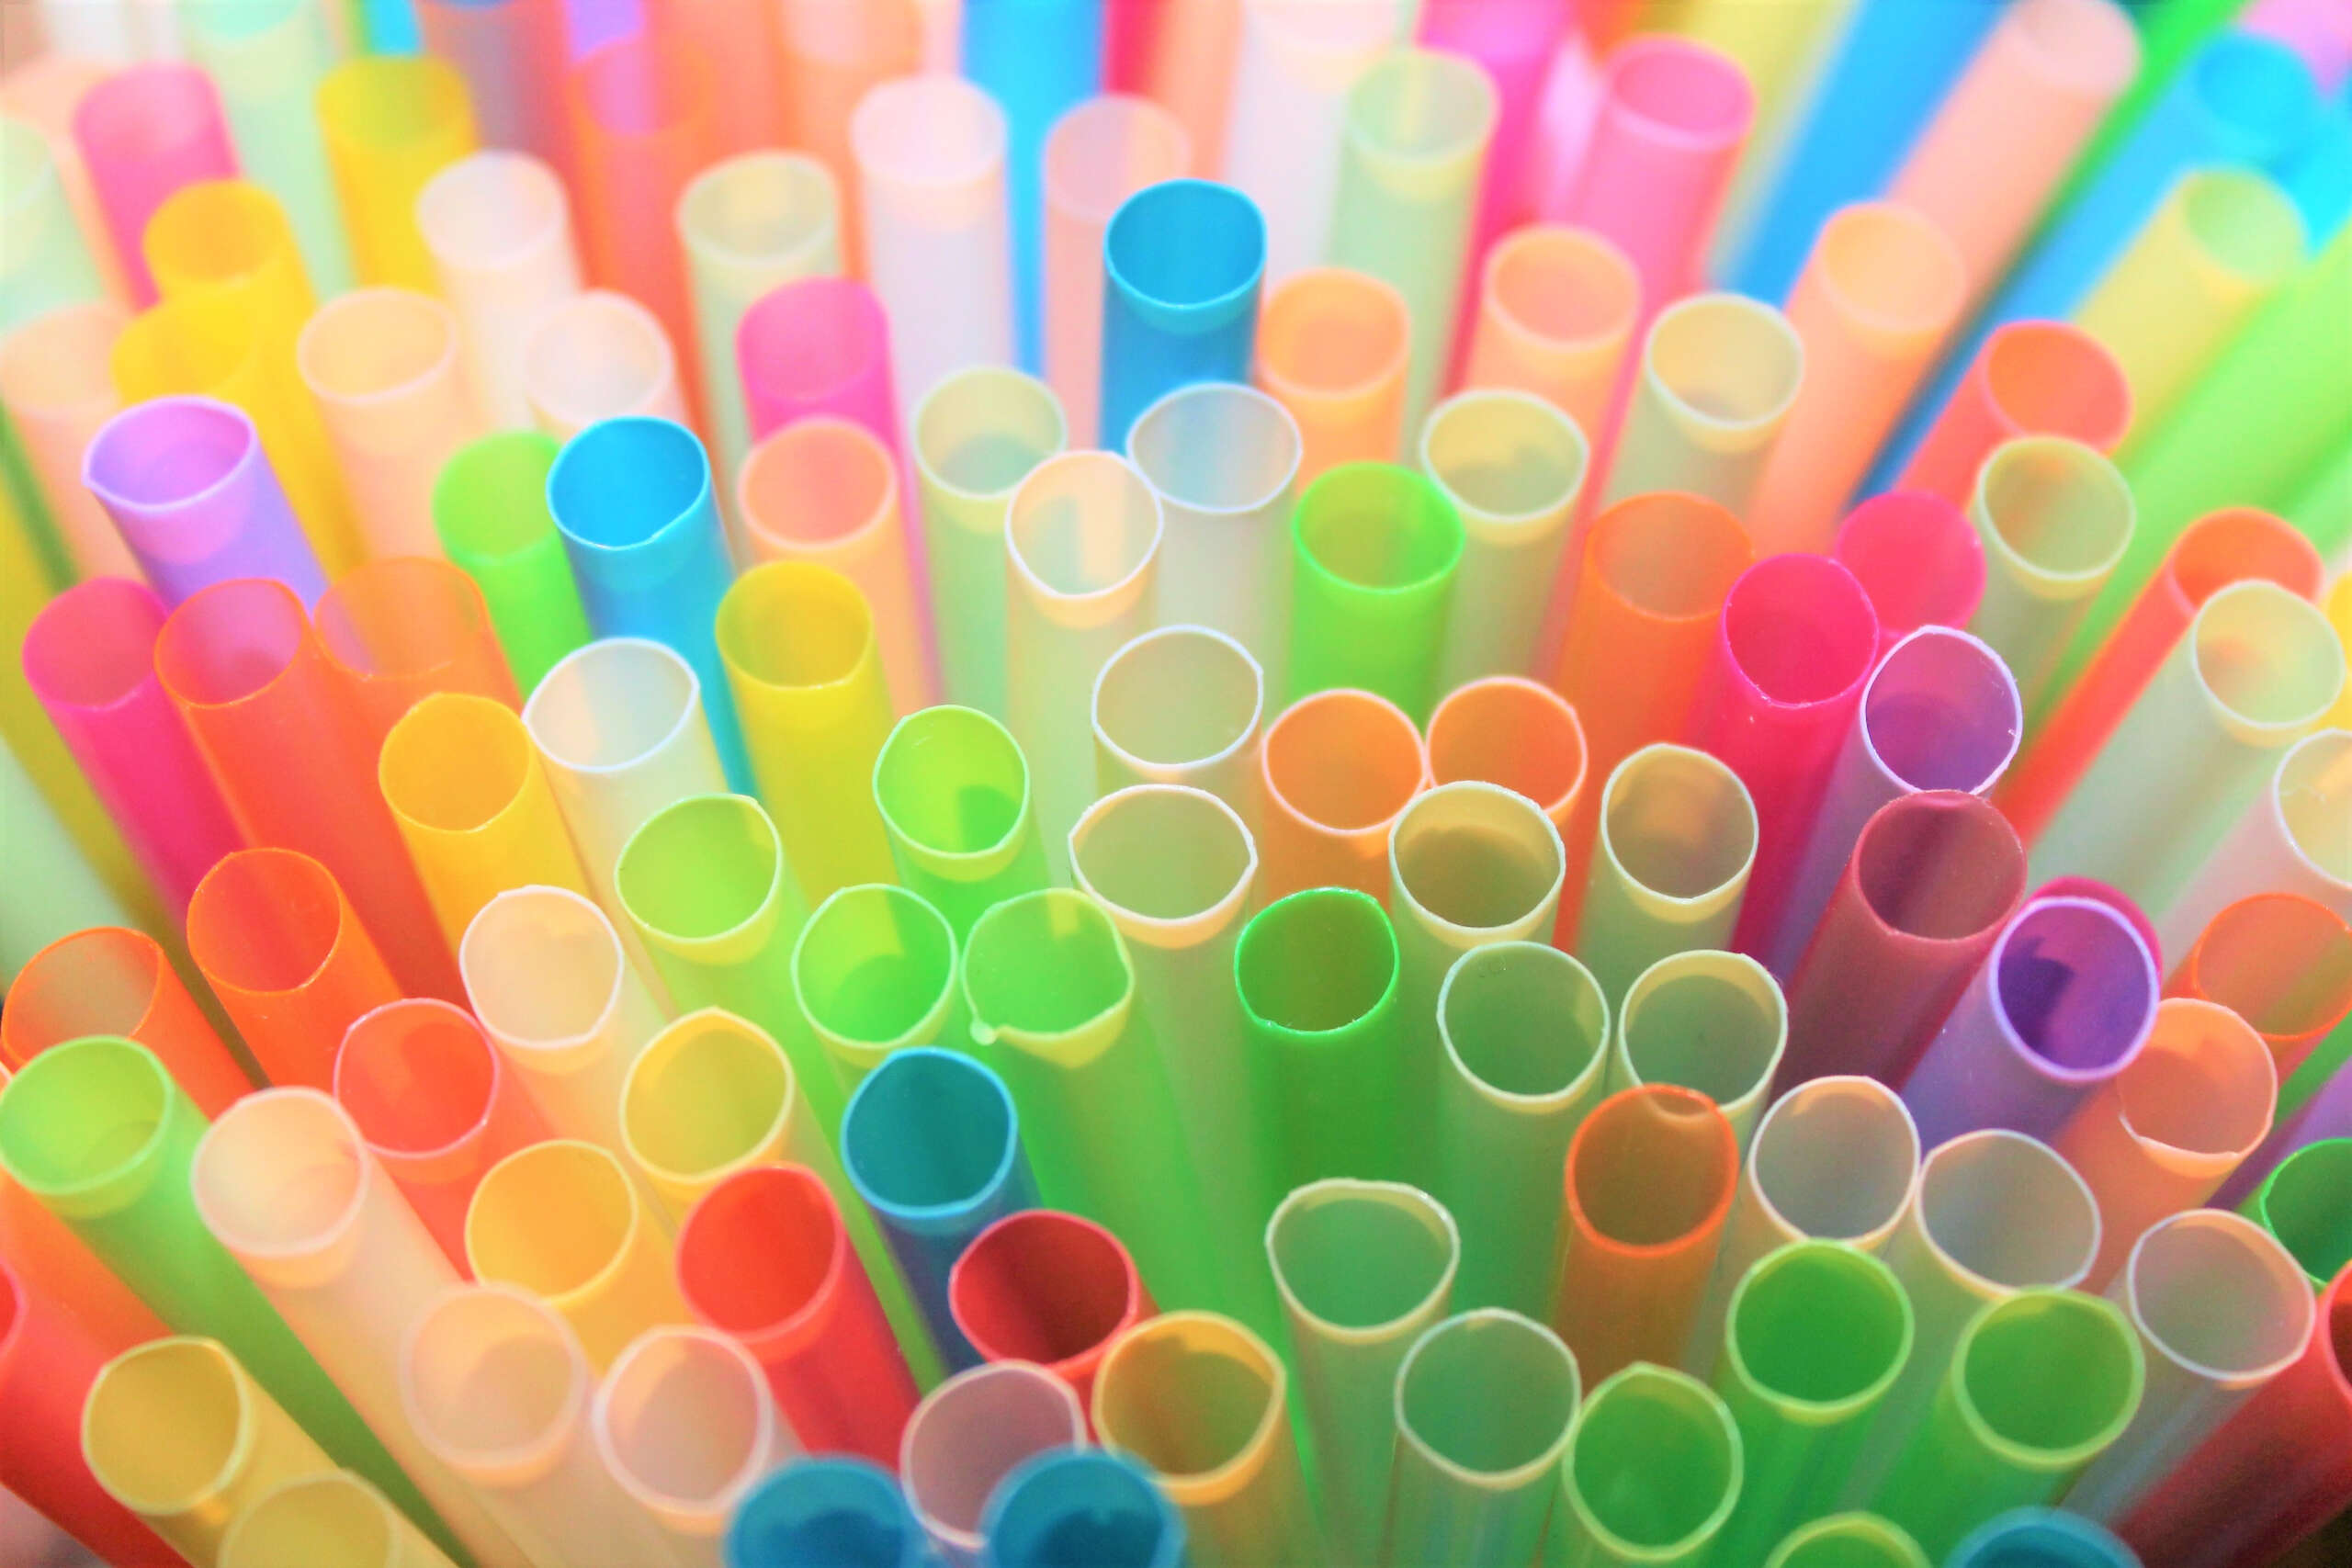 Paper straws found to contain long-lasting and potentially toxic chemicals  - study, Science & Tech News